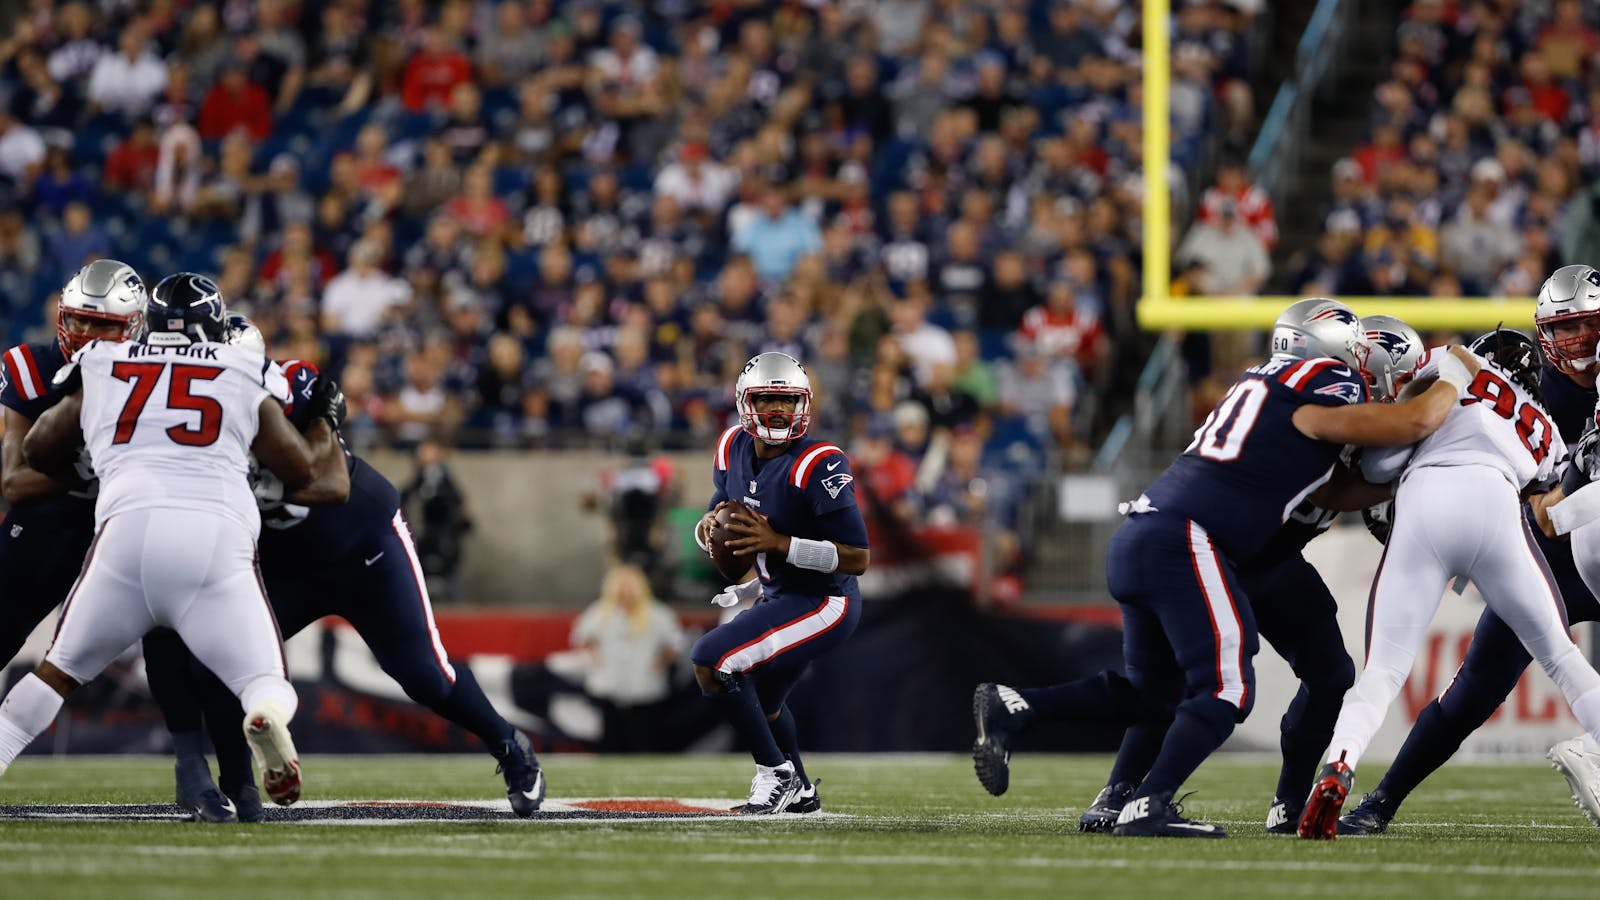 New England Patriots playing Houston Texans on Sept. 22, a game streamed on Twitter. Photo by AP.